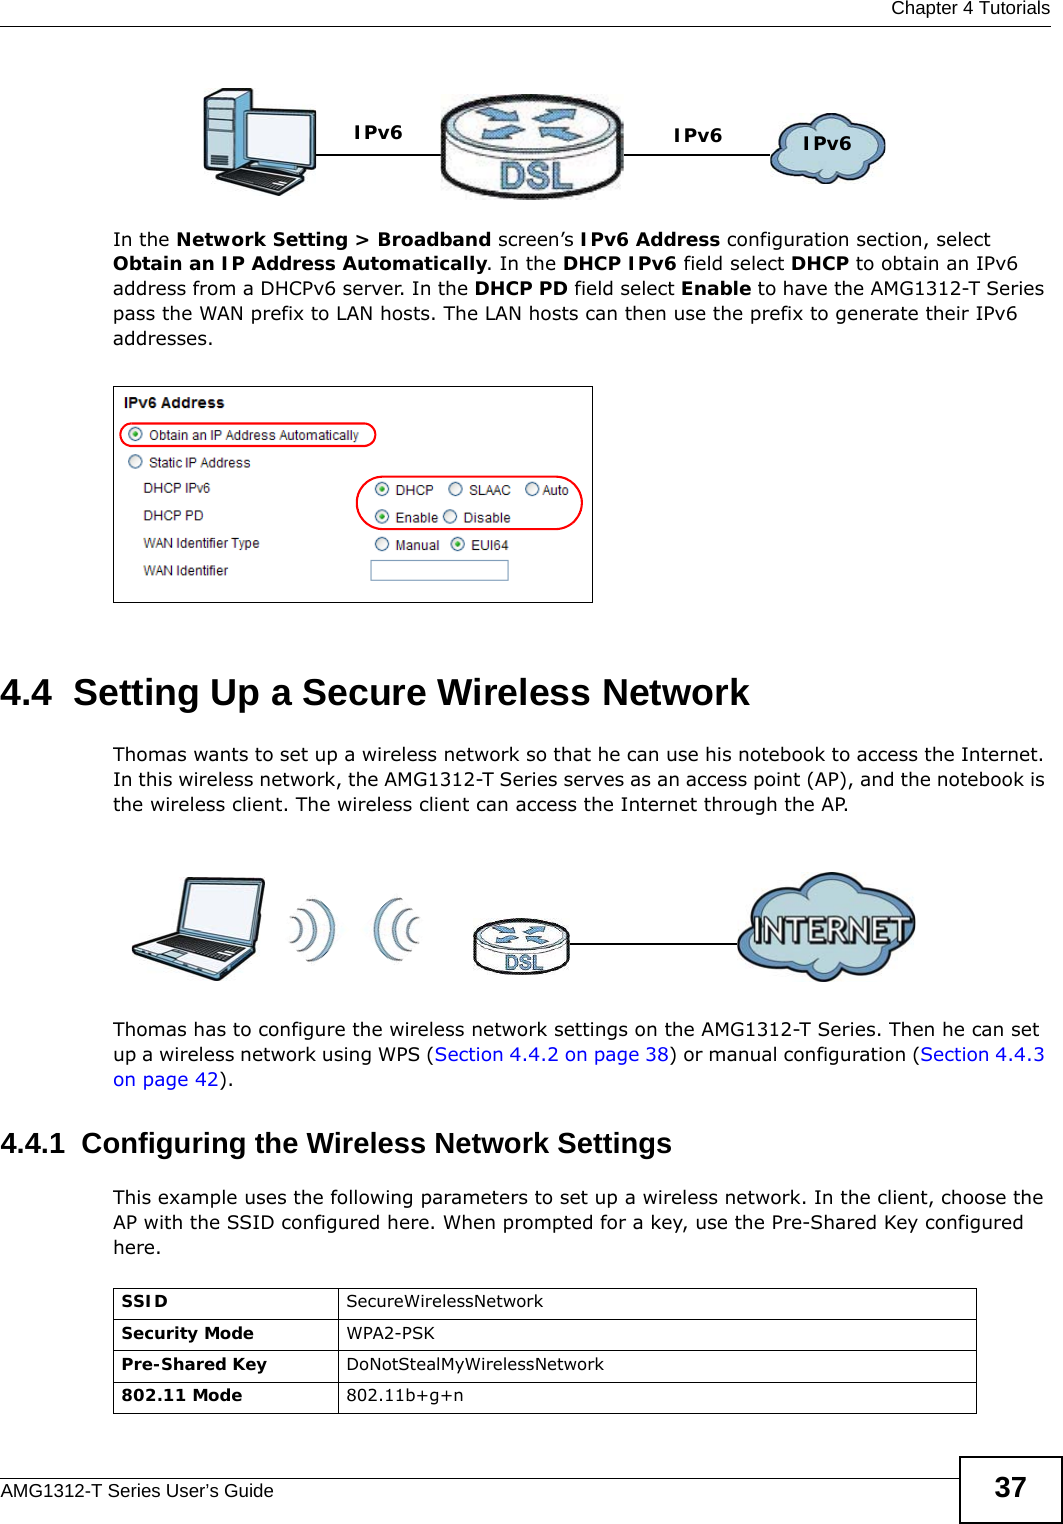  Chapter 4 TutorialsAMG1312-T Series User’s Guide 37In the Network Setting &gt; Broadband screen’s IPv6 Address configuration section, select Obtain an IP Address Automatically. In the DHCP IPv6 field select DHCP to obtain an IPv6 address from a DHCPv6 server. In the DHCP PD field select Enable to have the AMG1312-T Series pass the WAN prefix to LAN hosts. The LAN hosts can then use the prefix to generate their IPv6 addresses.4.4  Setting Up a Secure Wireless NetworkThomas wants to set up a wireless network so that he can use his notebook to access the Internet. In this wireless network, the AMG1312-T Series serves as an access point (AP), and the notebook is the wireless client. The wireless client can access the Internet through the AP.Thomas has to configure the wireless network settings on the AMG1312-T Series. Then he can set up a wireless network using WPS (Section 4.4.2 on page 38) or manual configuration (Section 4.4.3 on page 42).4.4.1  Configuring the Wireless Network SettingsThis example uses the following parameters to set up a wireless network. In the client, choose the AP with the SSID configured here. When prompted for a key, use the Pre-Shared Key configured here.IPv6IPv6IPv6SSID SecureWirelessNetworkSecurity Mode WPA2-PSKPre-Shared Key DoNotStealMyWirelessNetwork802.11 Mode 802.11b+g+n